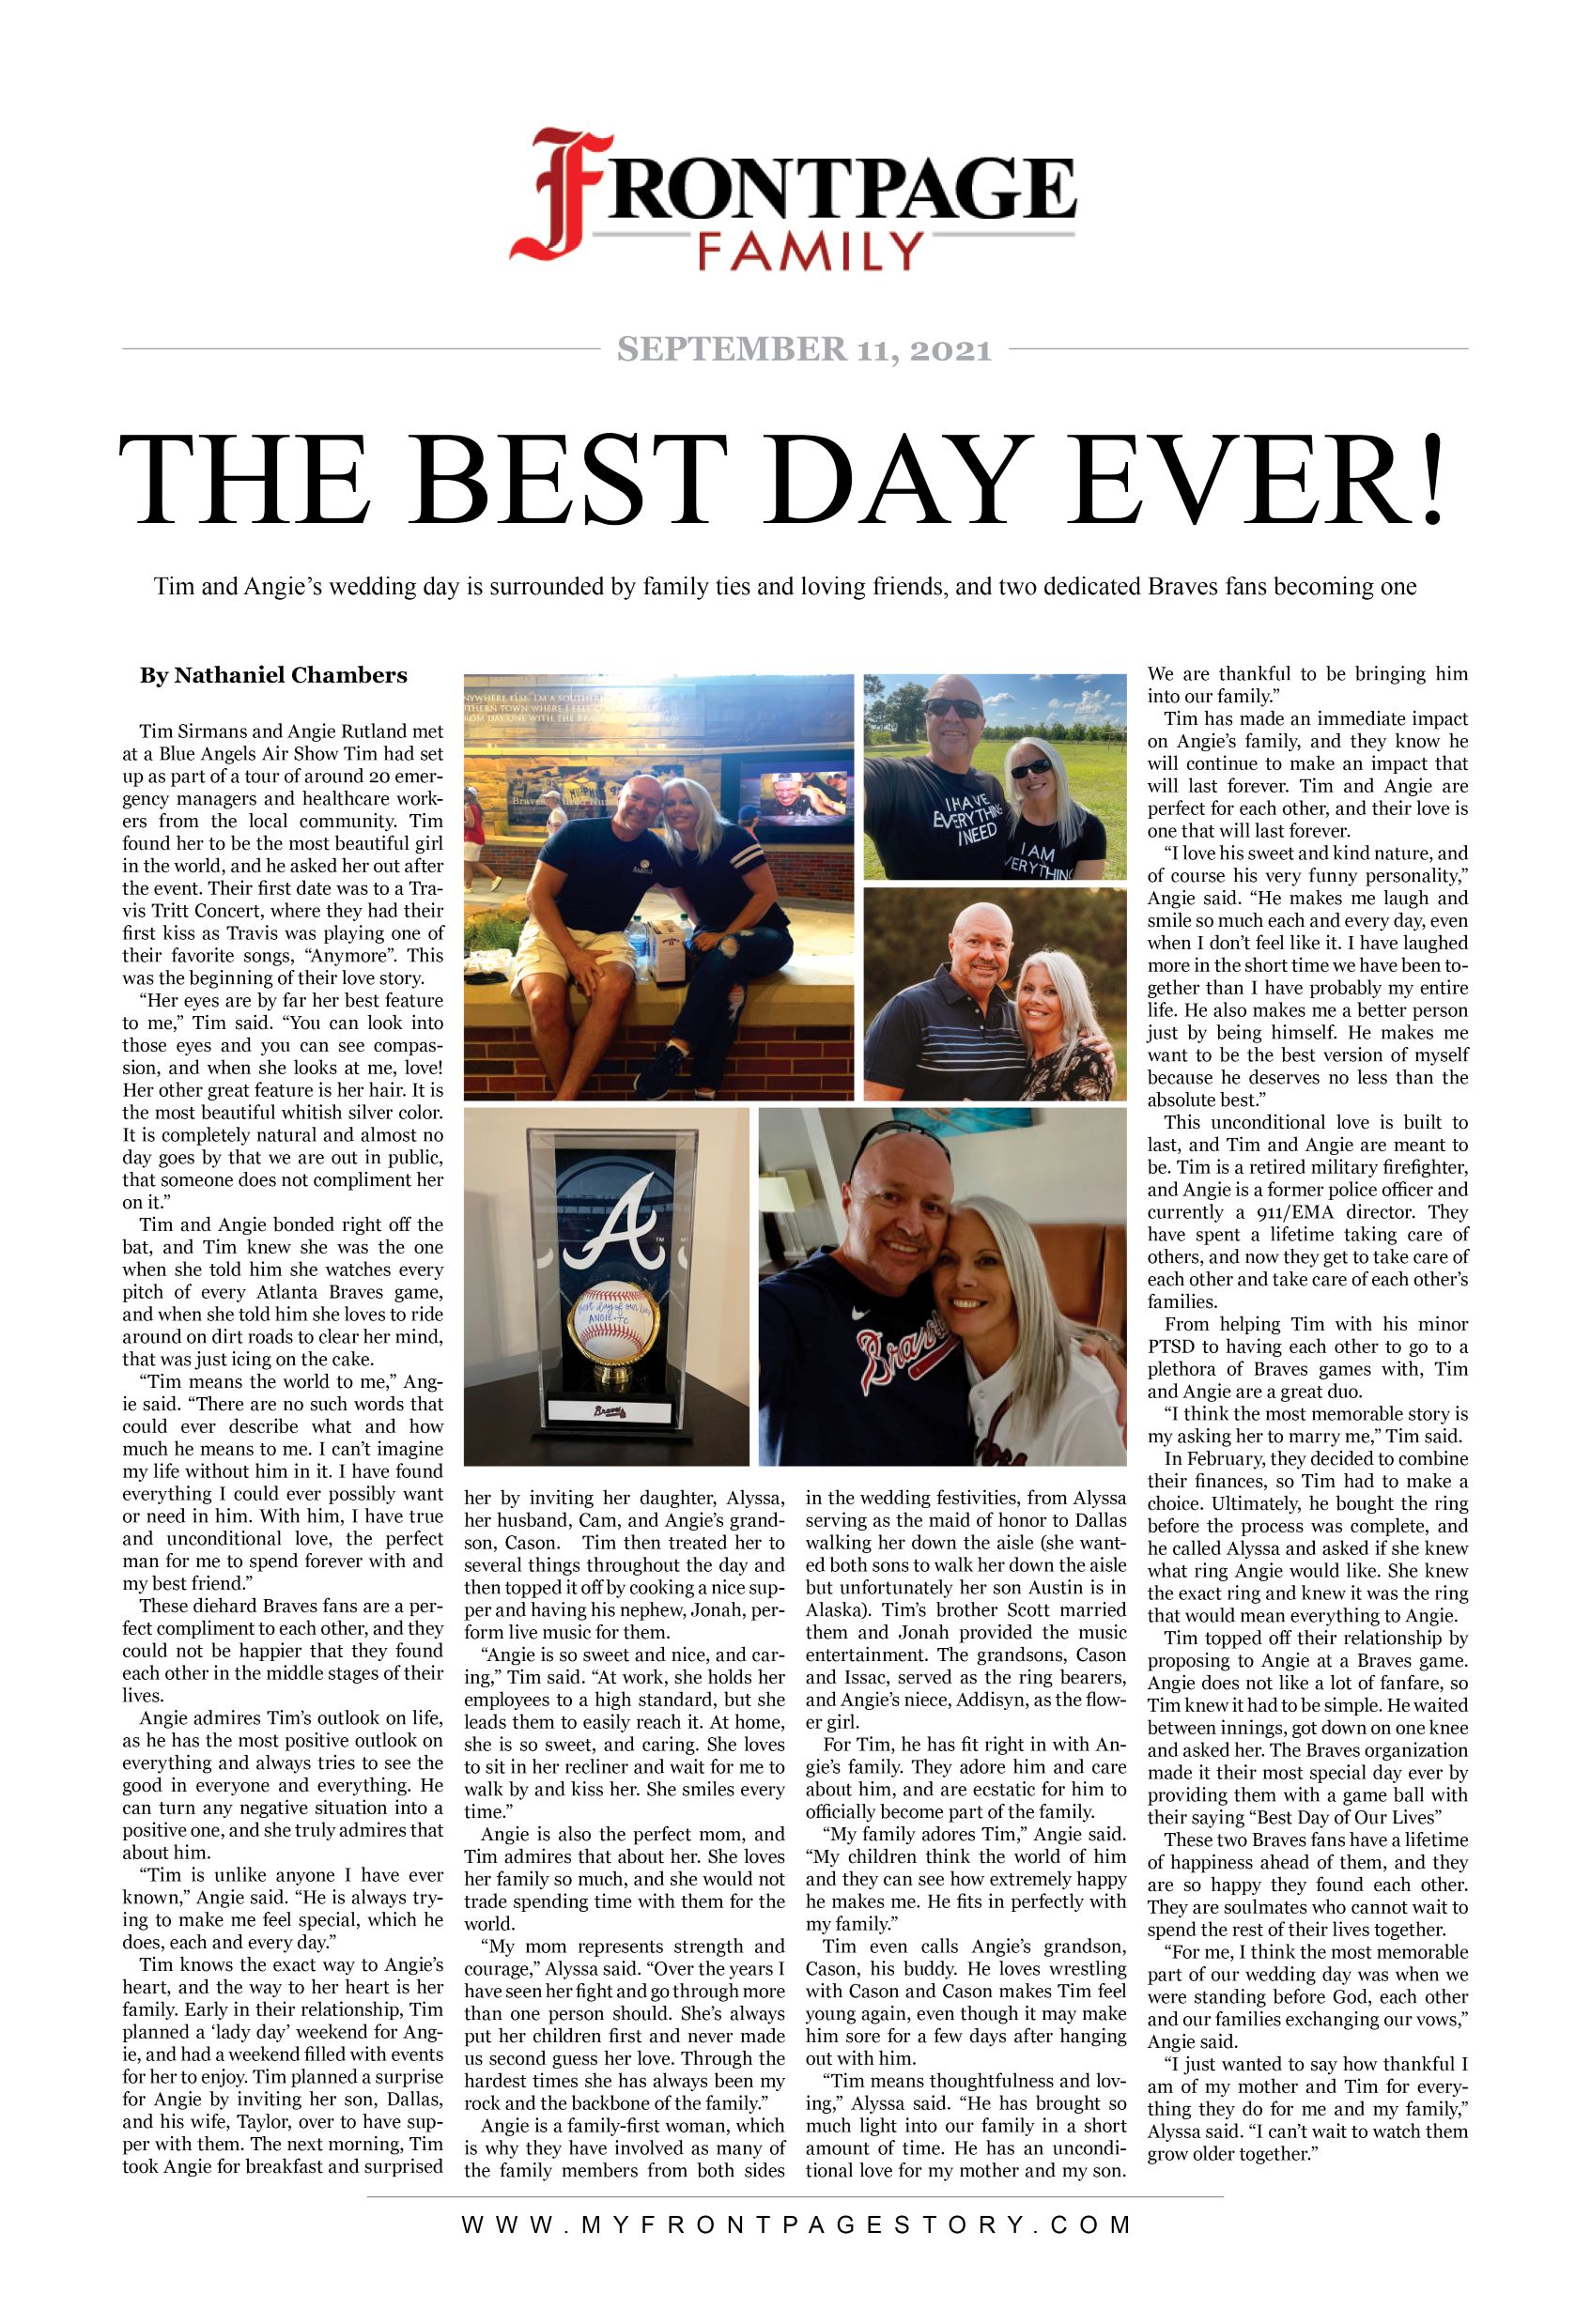 Personalized newspaper headlines: Tim and Angie's story titled 'THE BEST DAY EVER!'